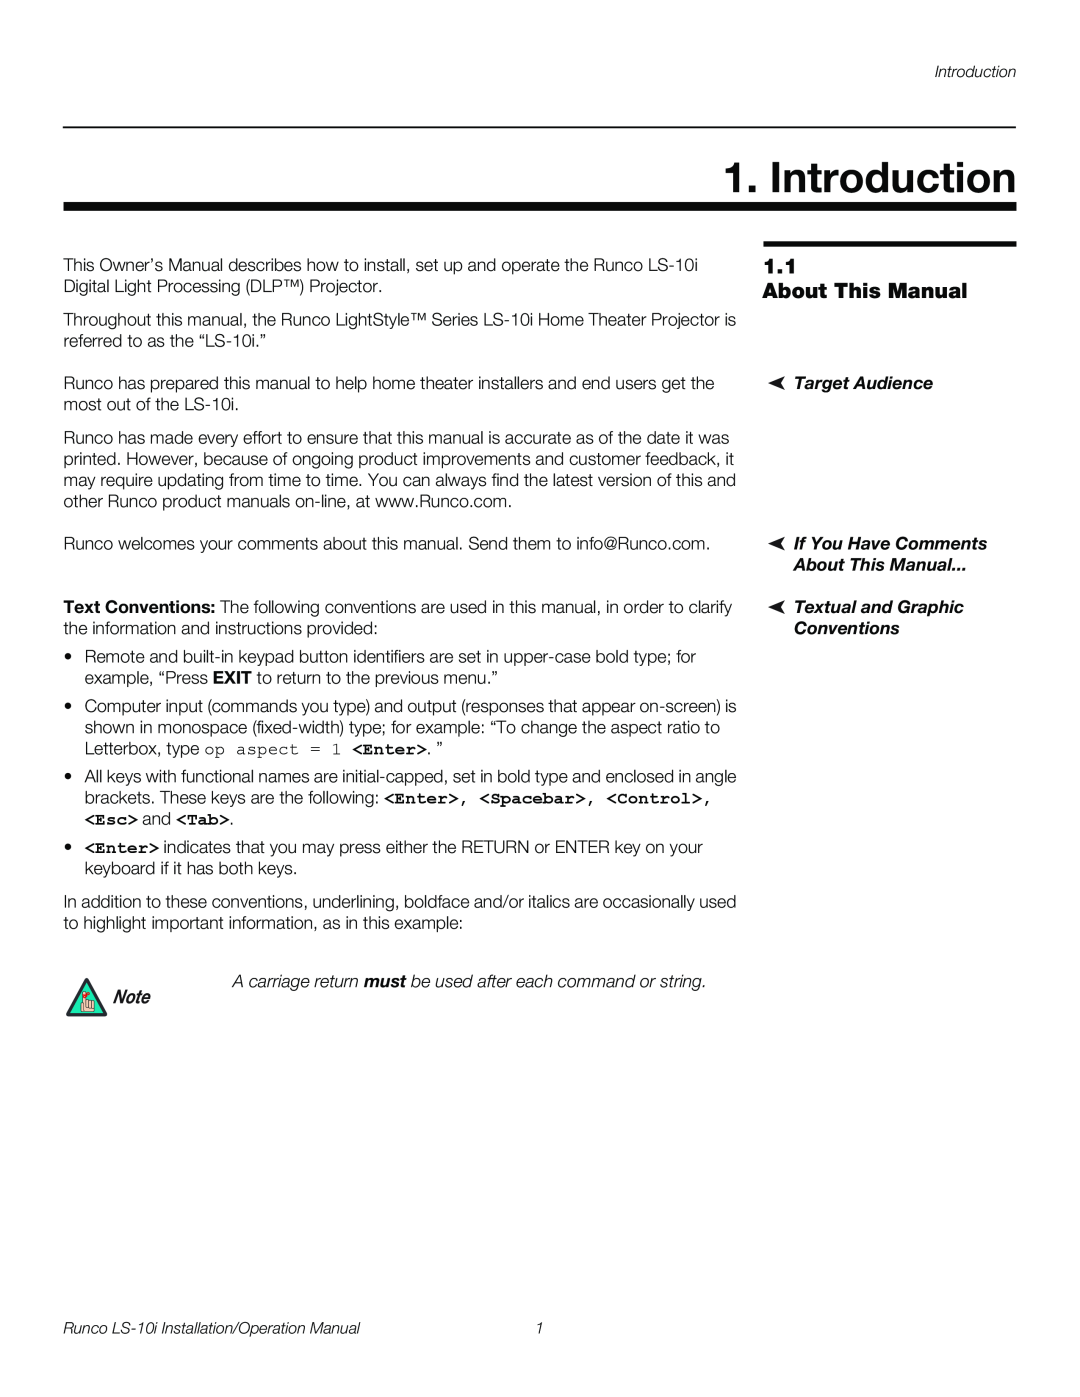 Runco LS-10I Introduction, About This Manual, Target Audience, If You Have Comments, Textual and Graphic, Conventions 